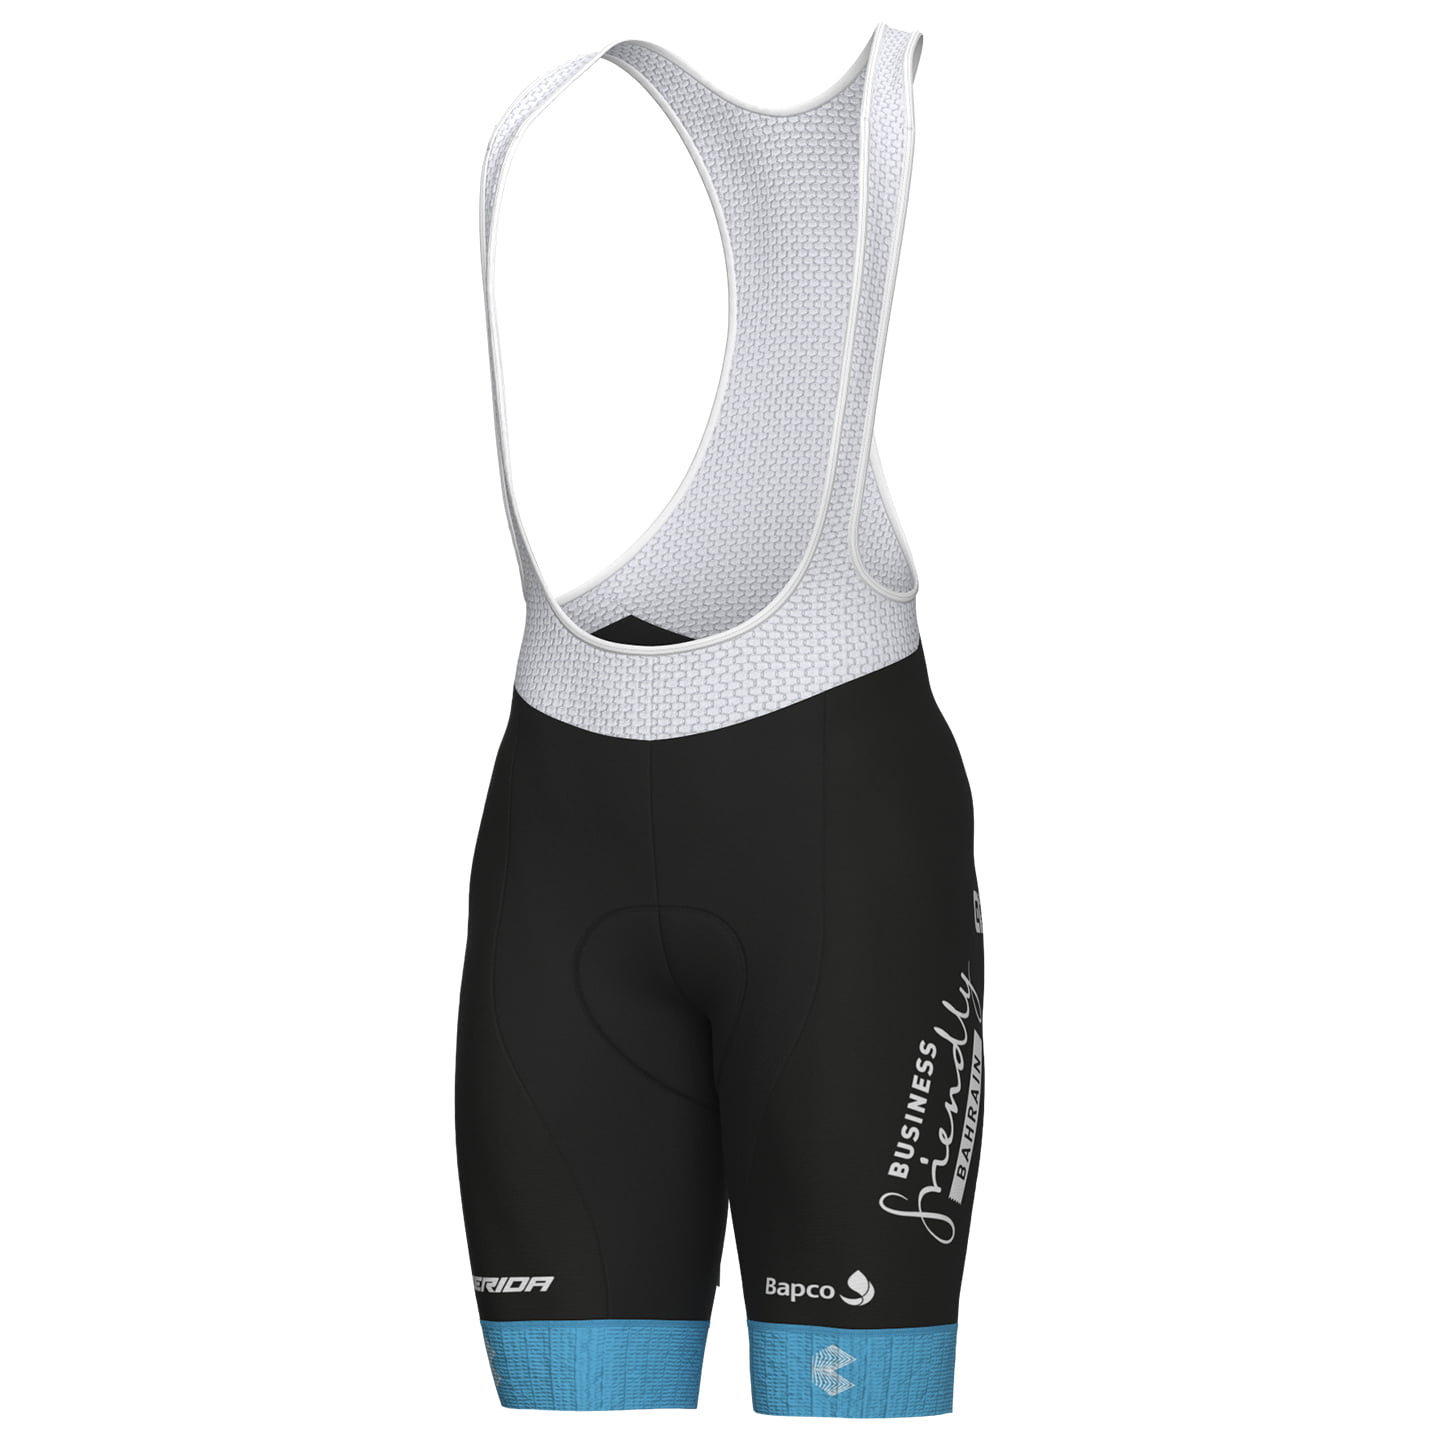 BAHRAIN - VICTORIOUS 2023 Bib Shorts, for men, size XL, Cycle trousers, Cycle clothing